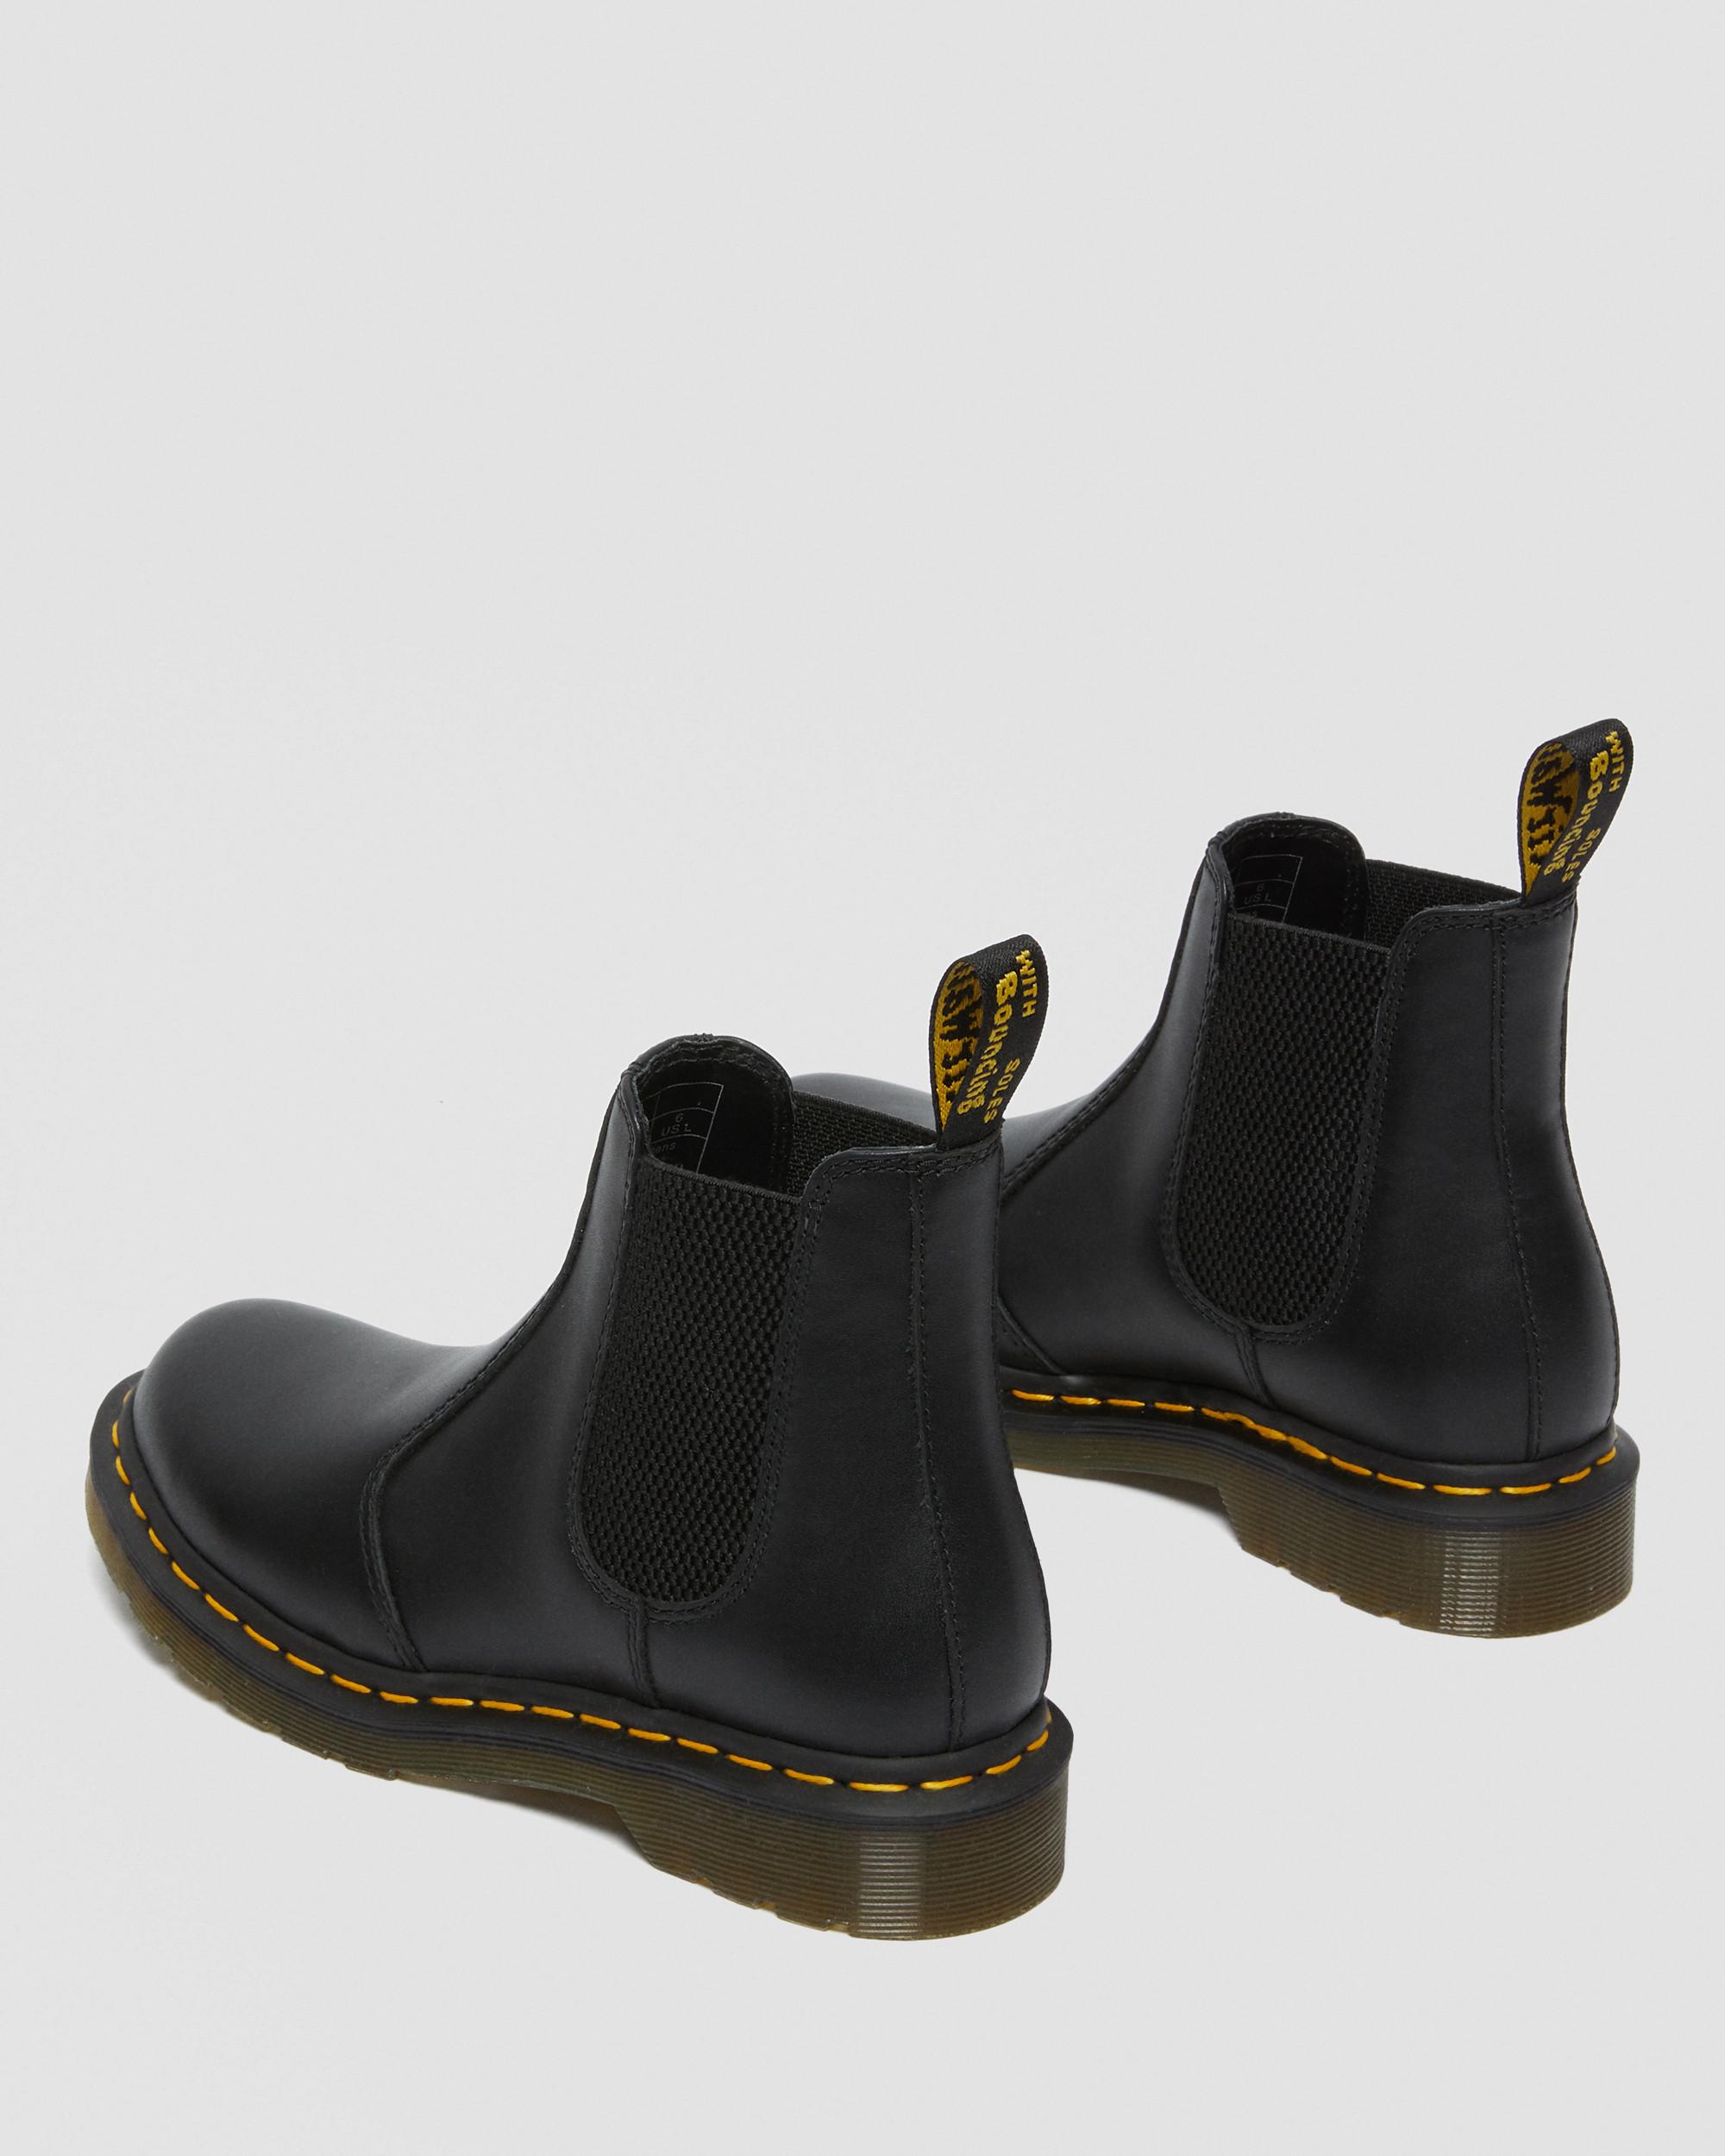 DR MARTENS Women's 2976 Nappa Leather Chelsea Boots